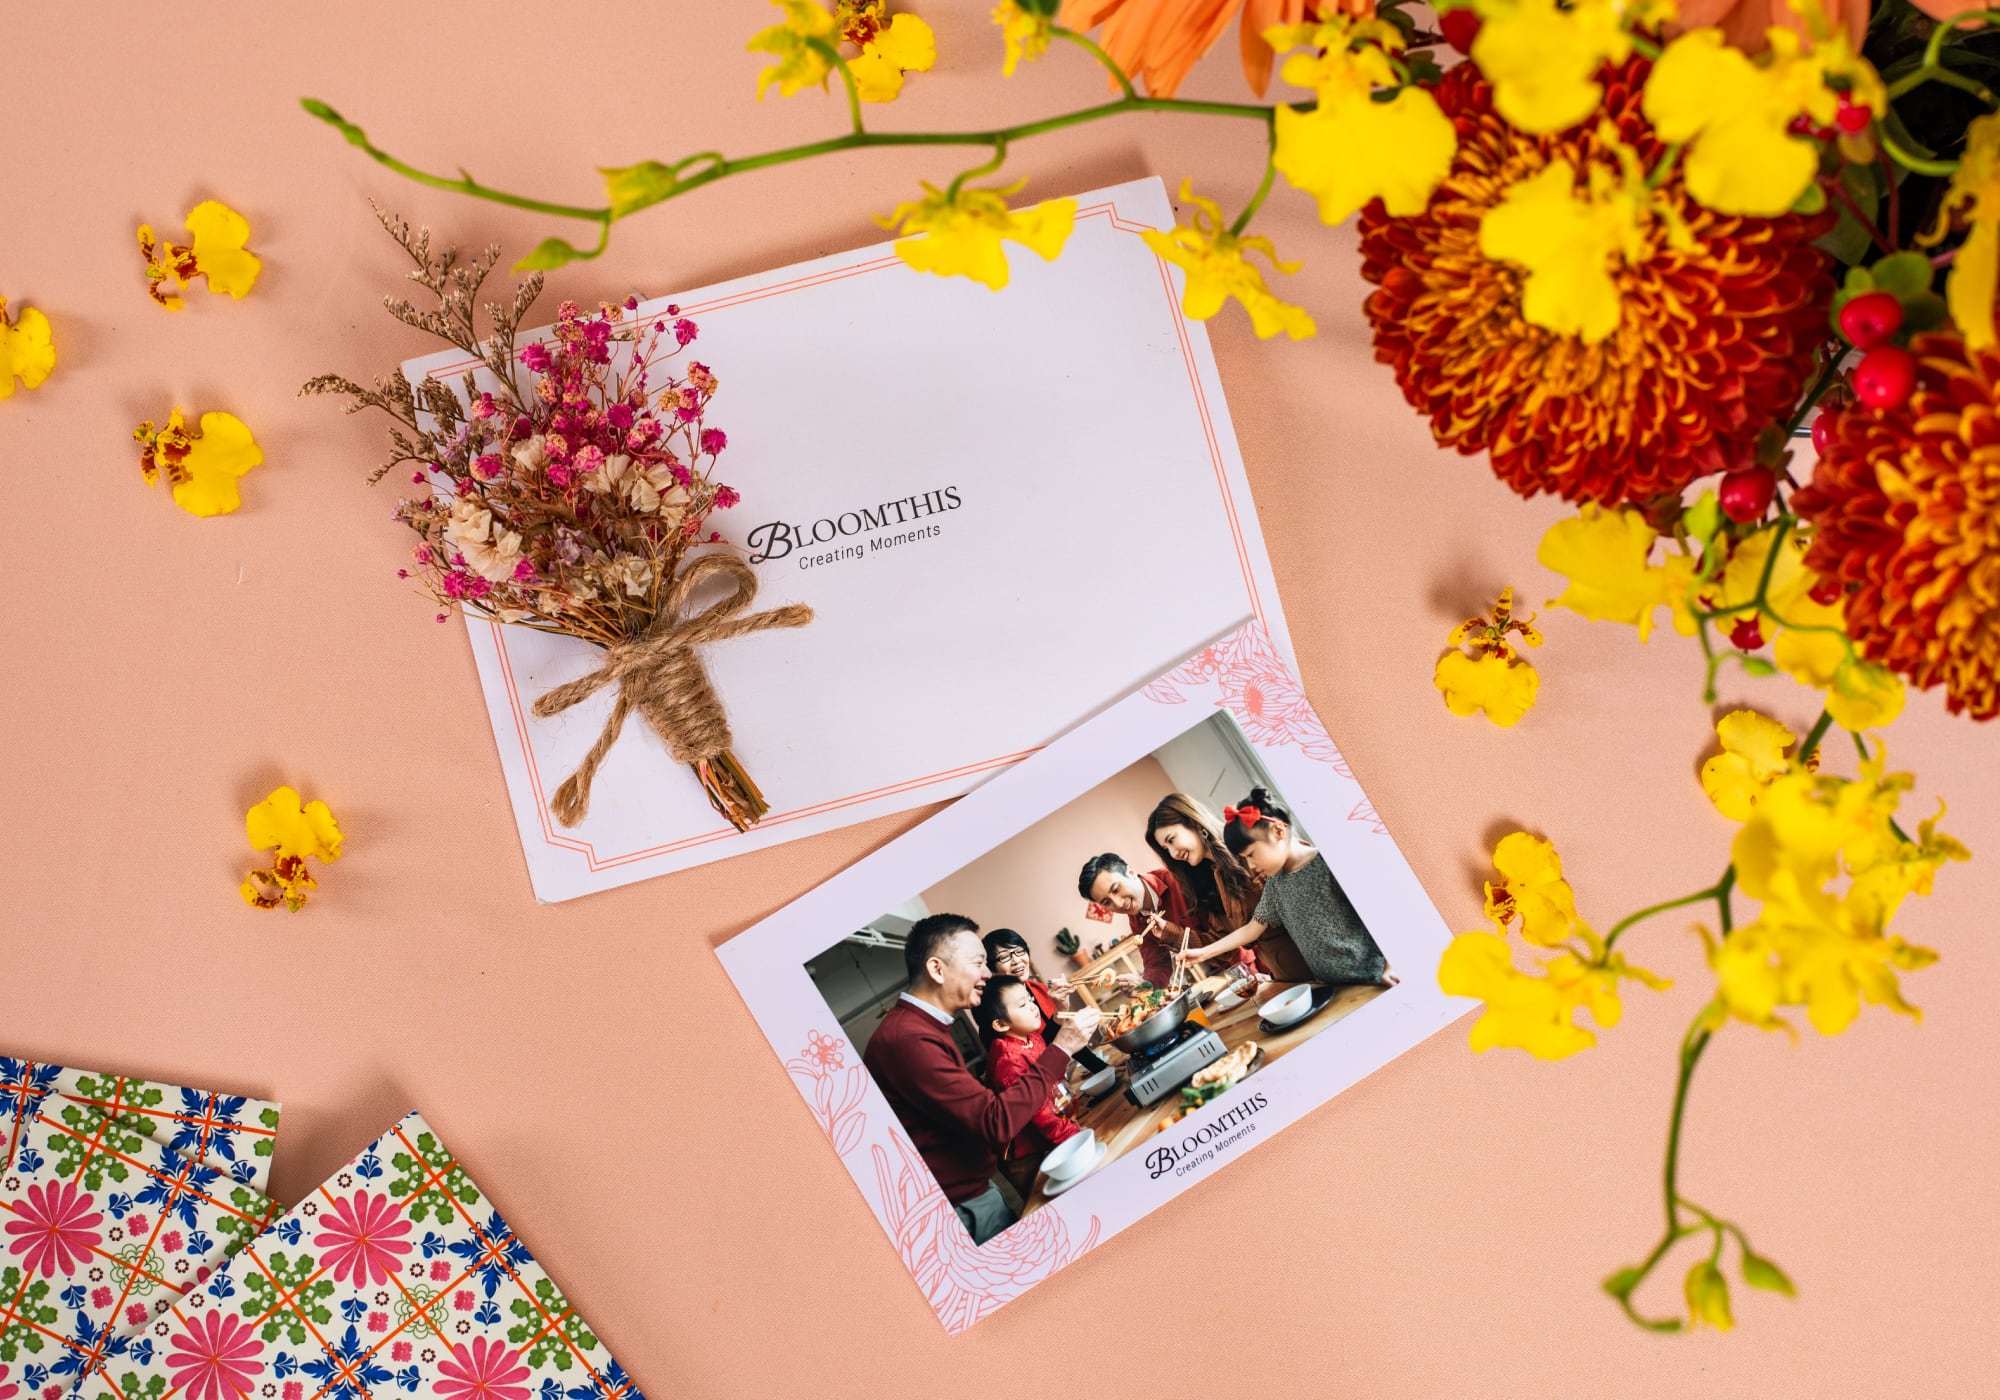 bloomthis-chinese-new-year-hampers-usp-03-free-personalised-card-photo